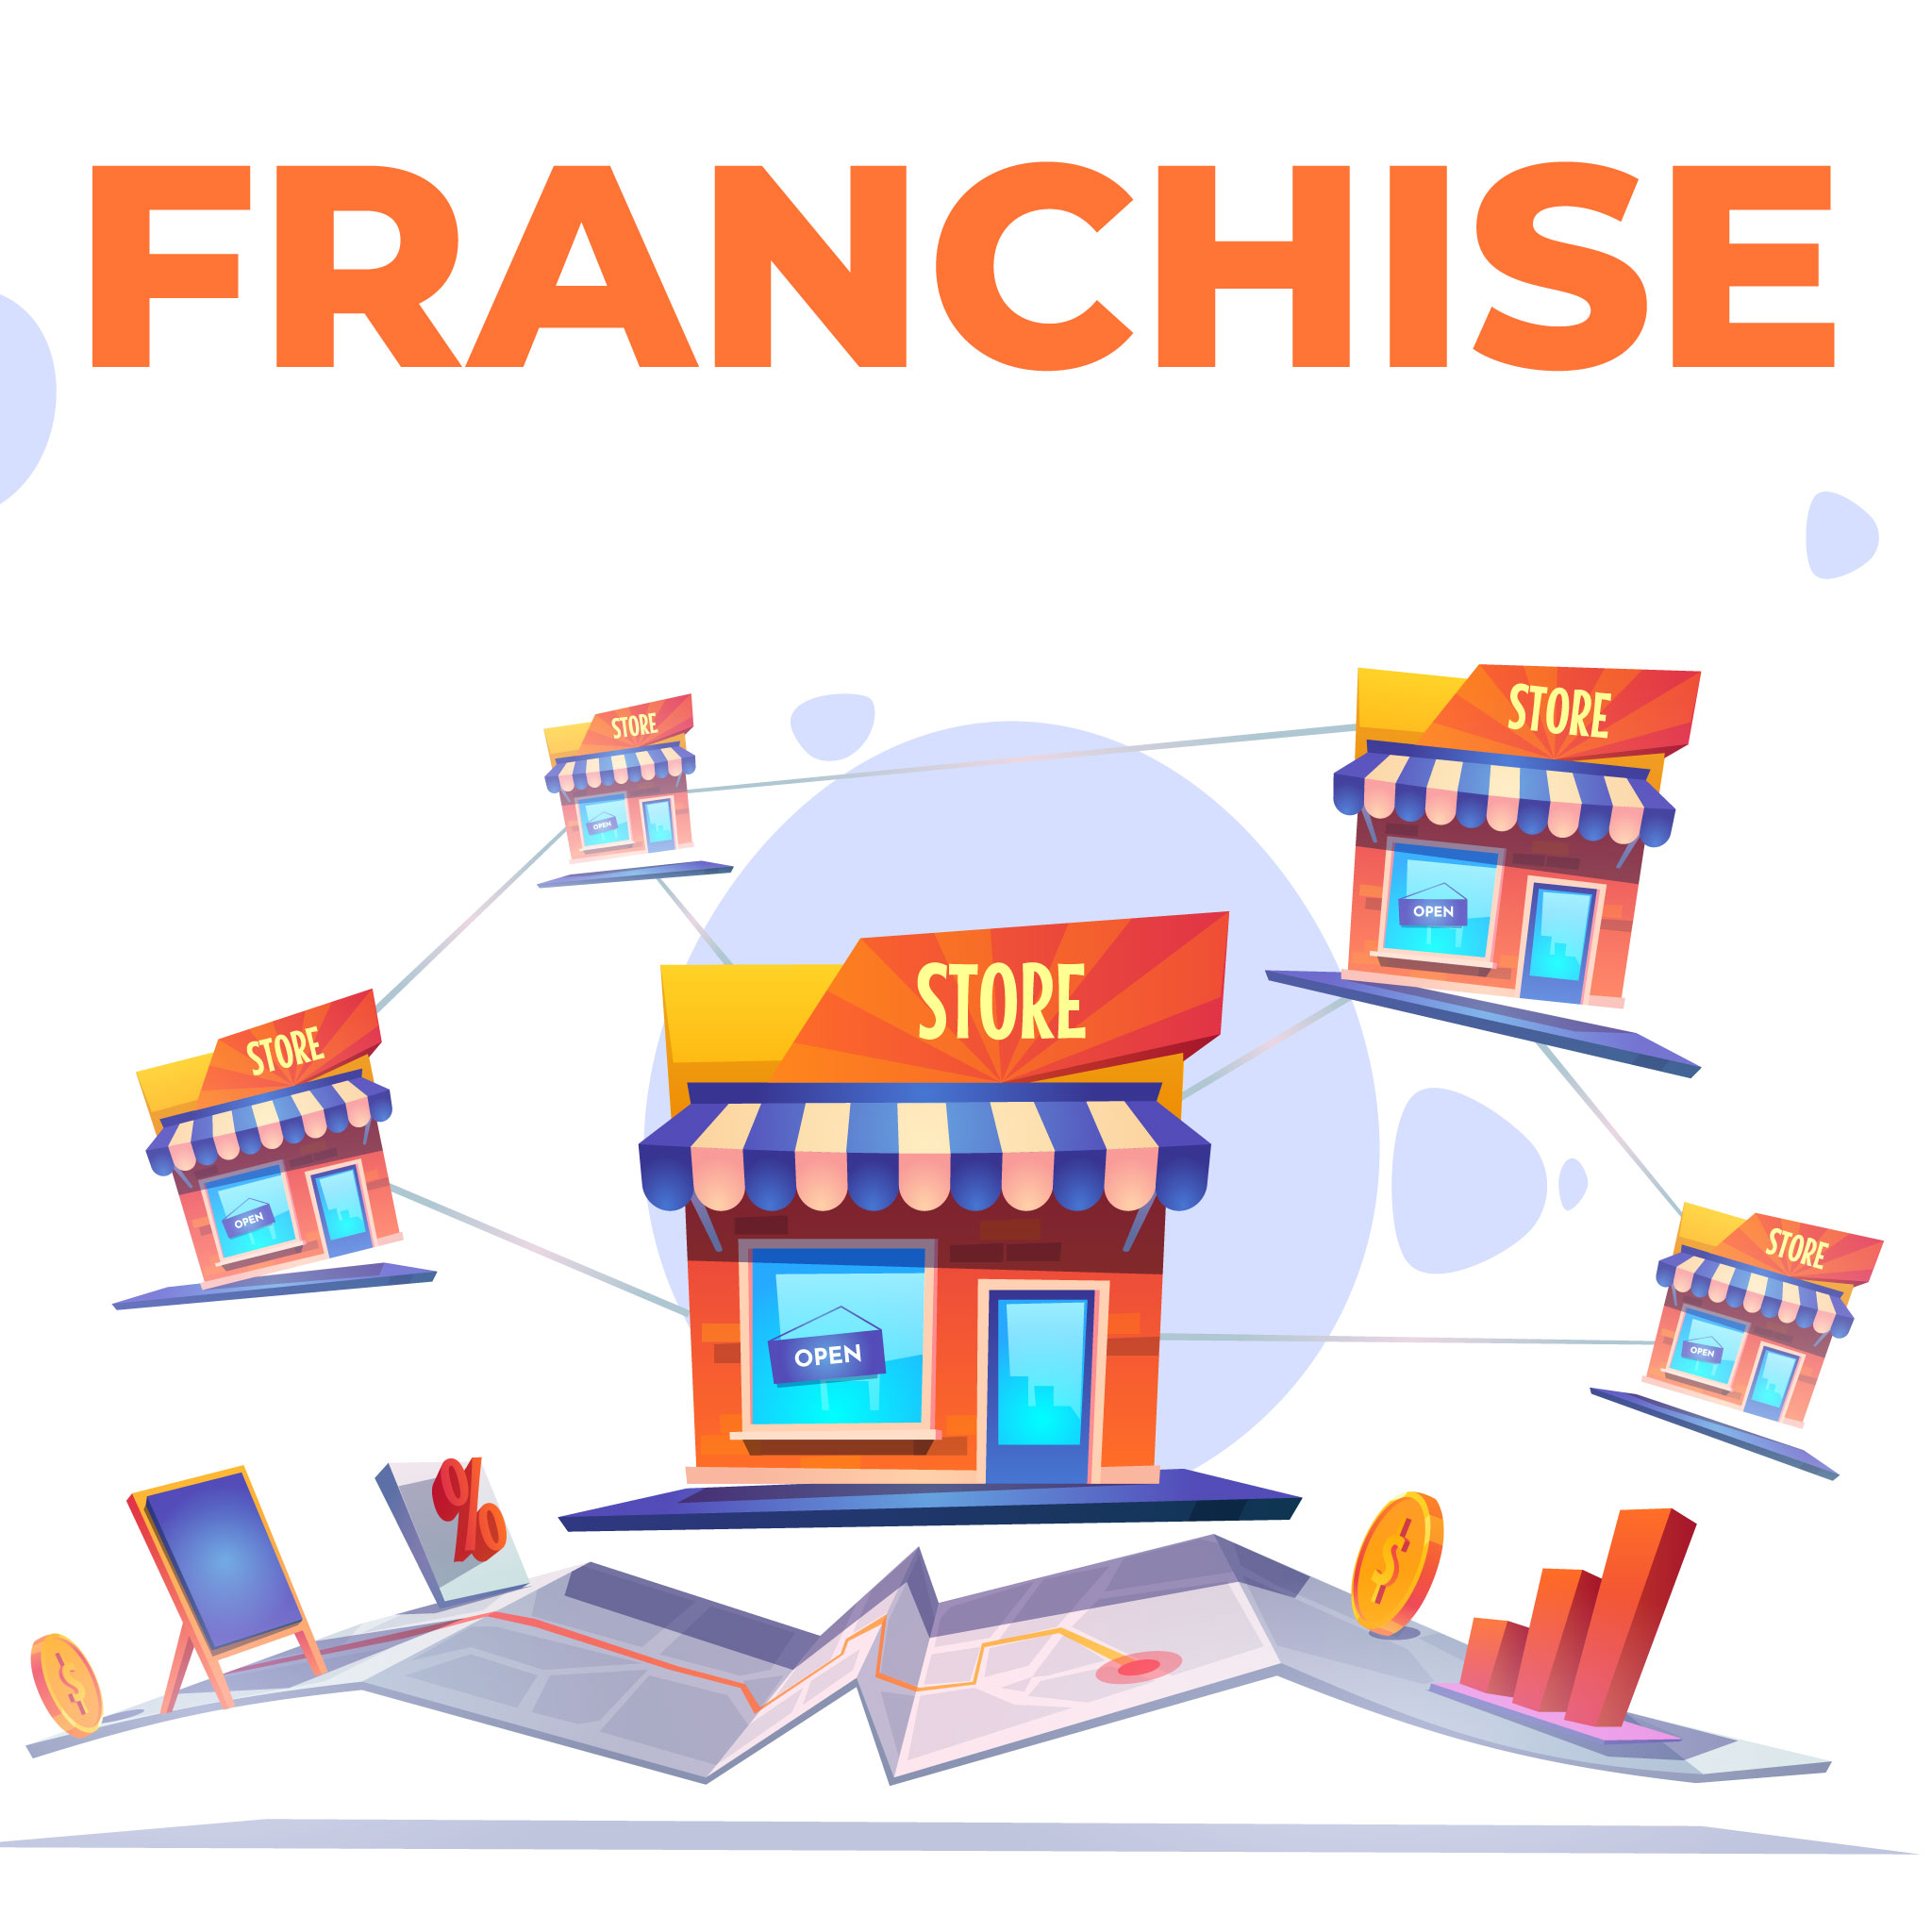 Franchise_BUILDING WIN-WIN RELATIONSHIPS WITH INDUSTRY GIANTS